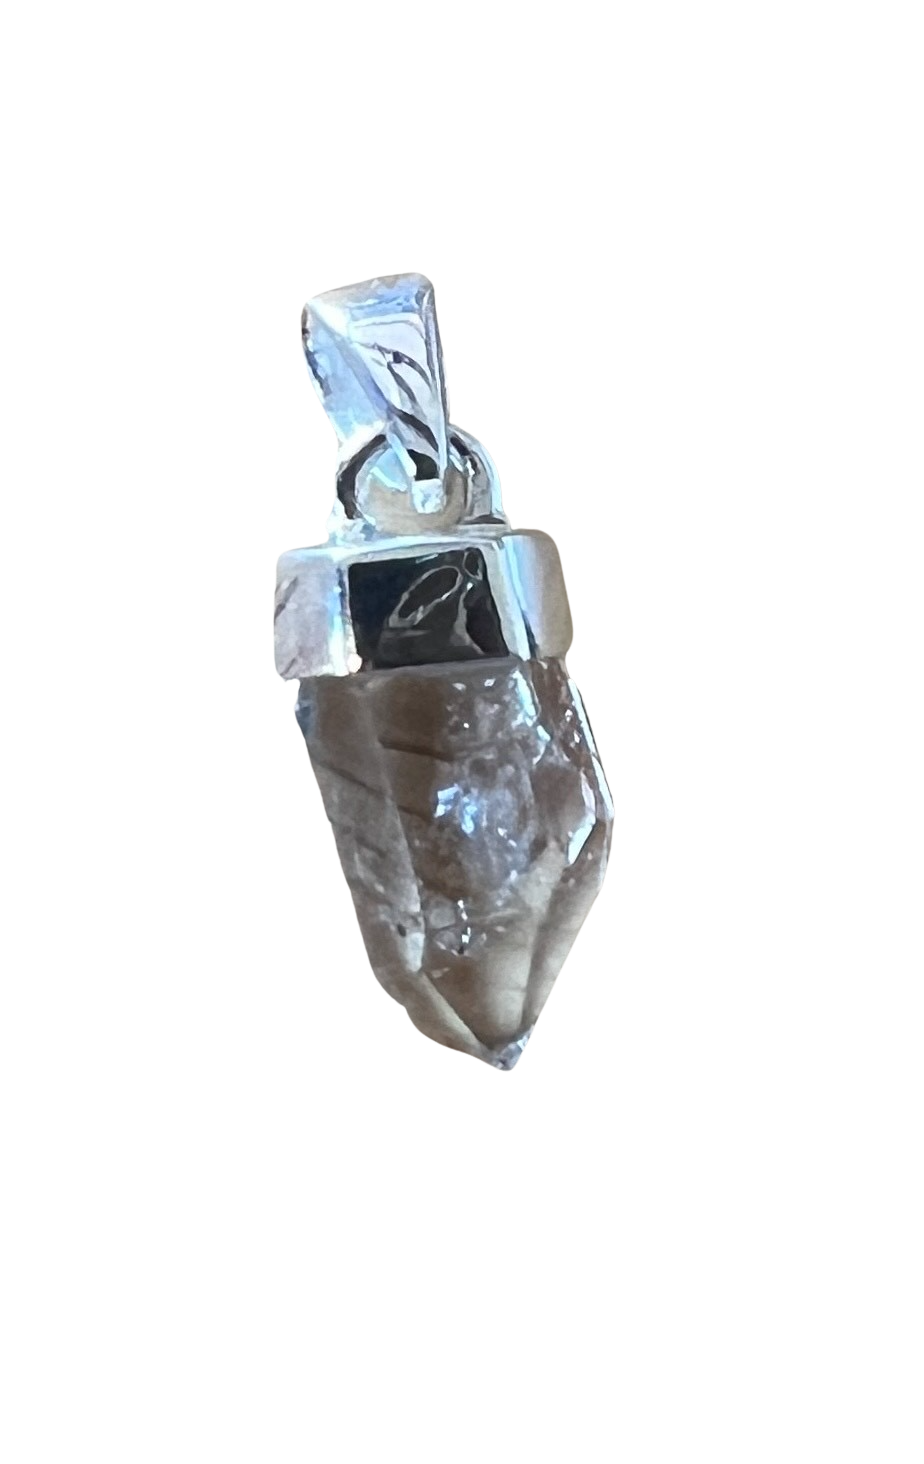 Crystal Sterling Silver Pendant